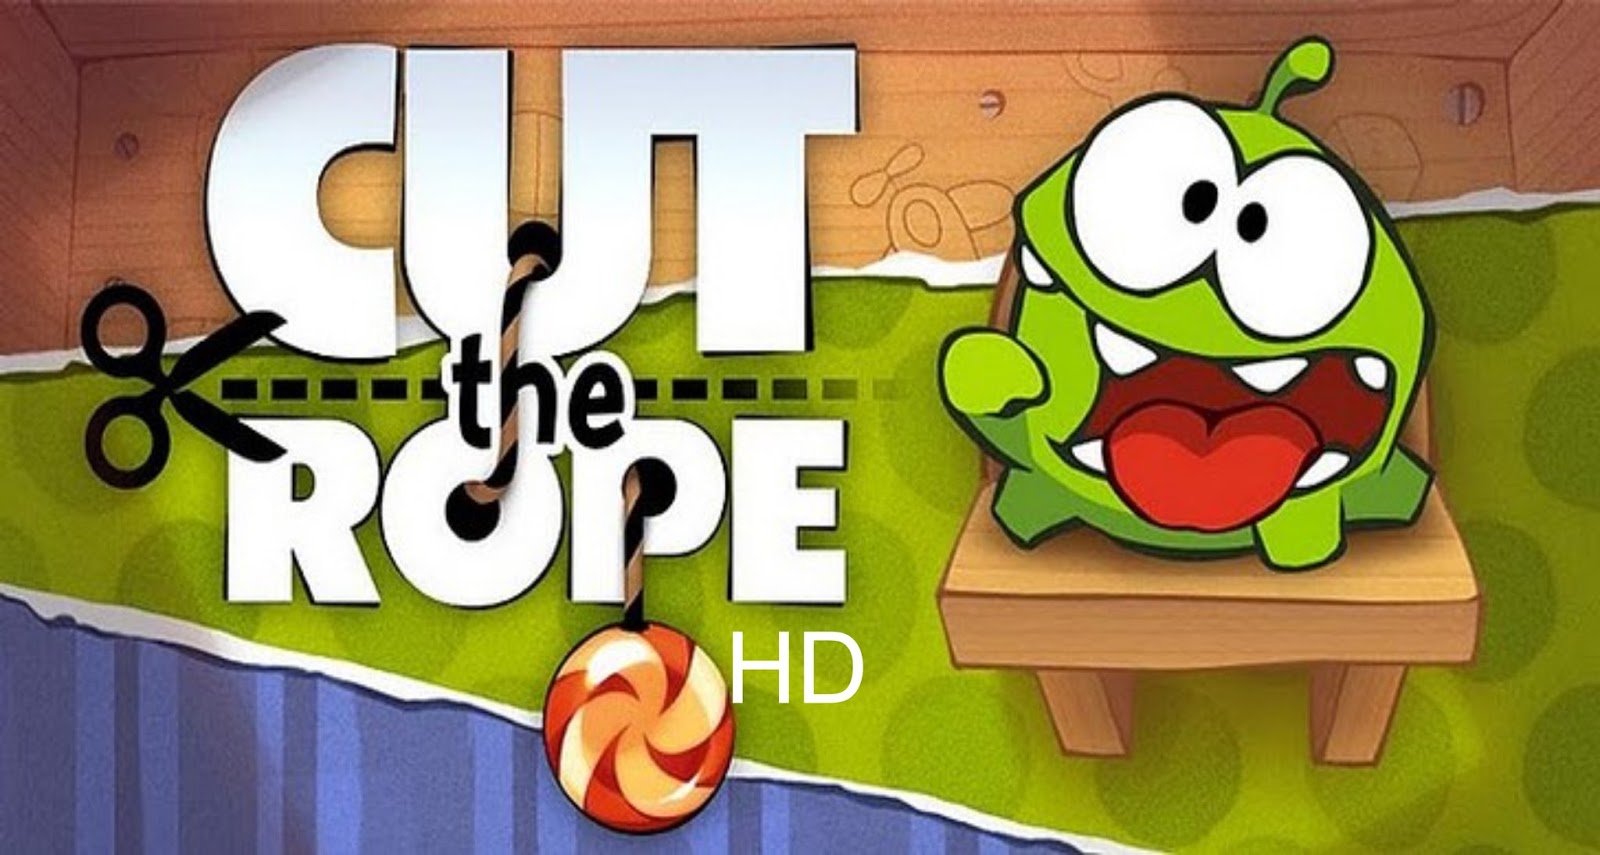 Cut The Rope 2 For Android Apk Download